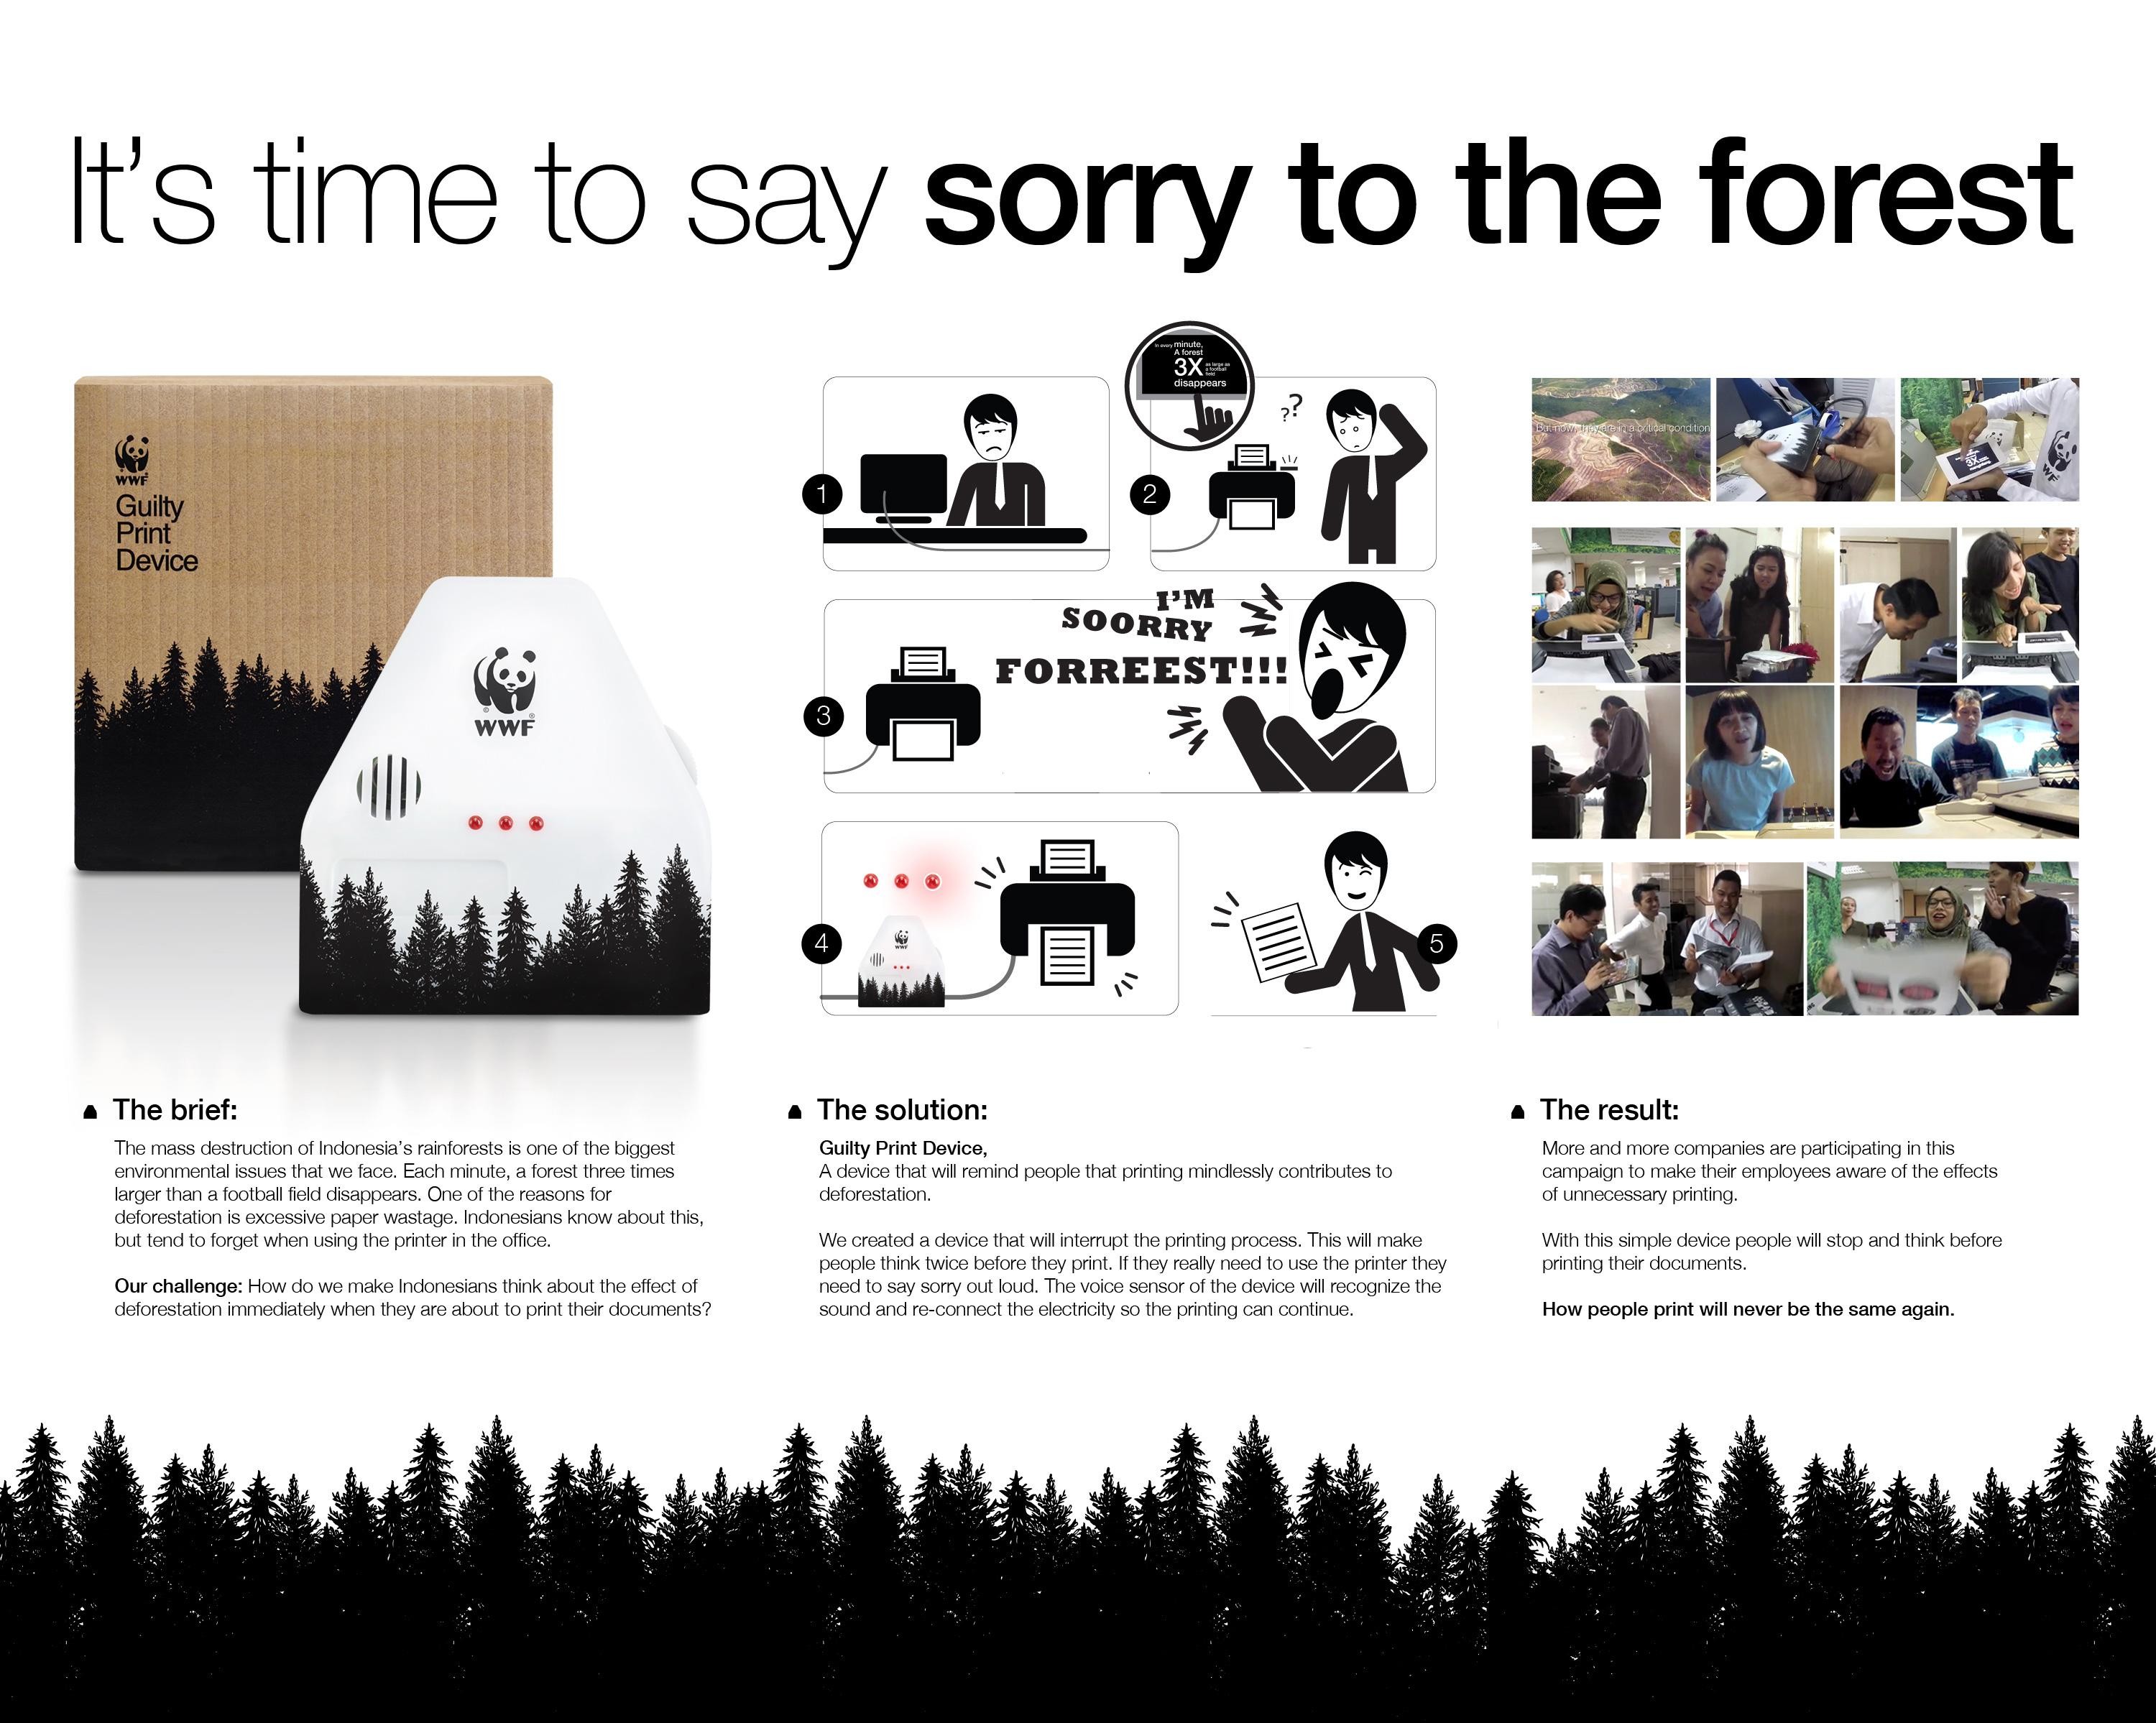 It's Time to Say Sorry to the Forest